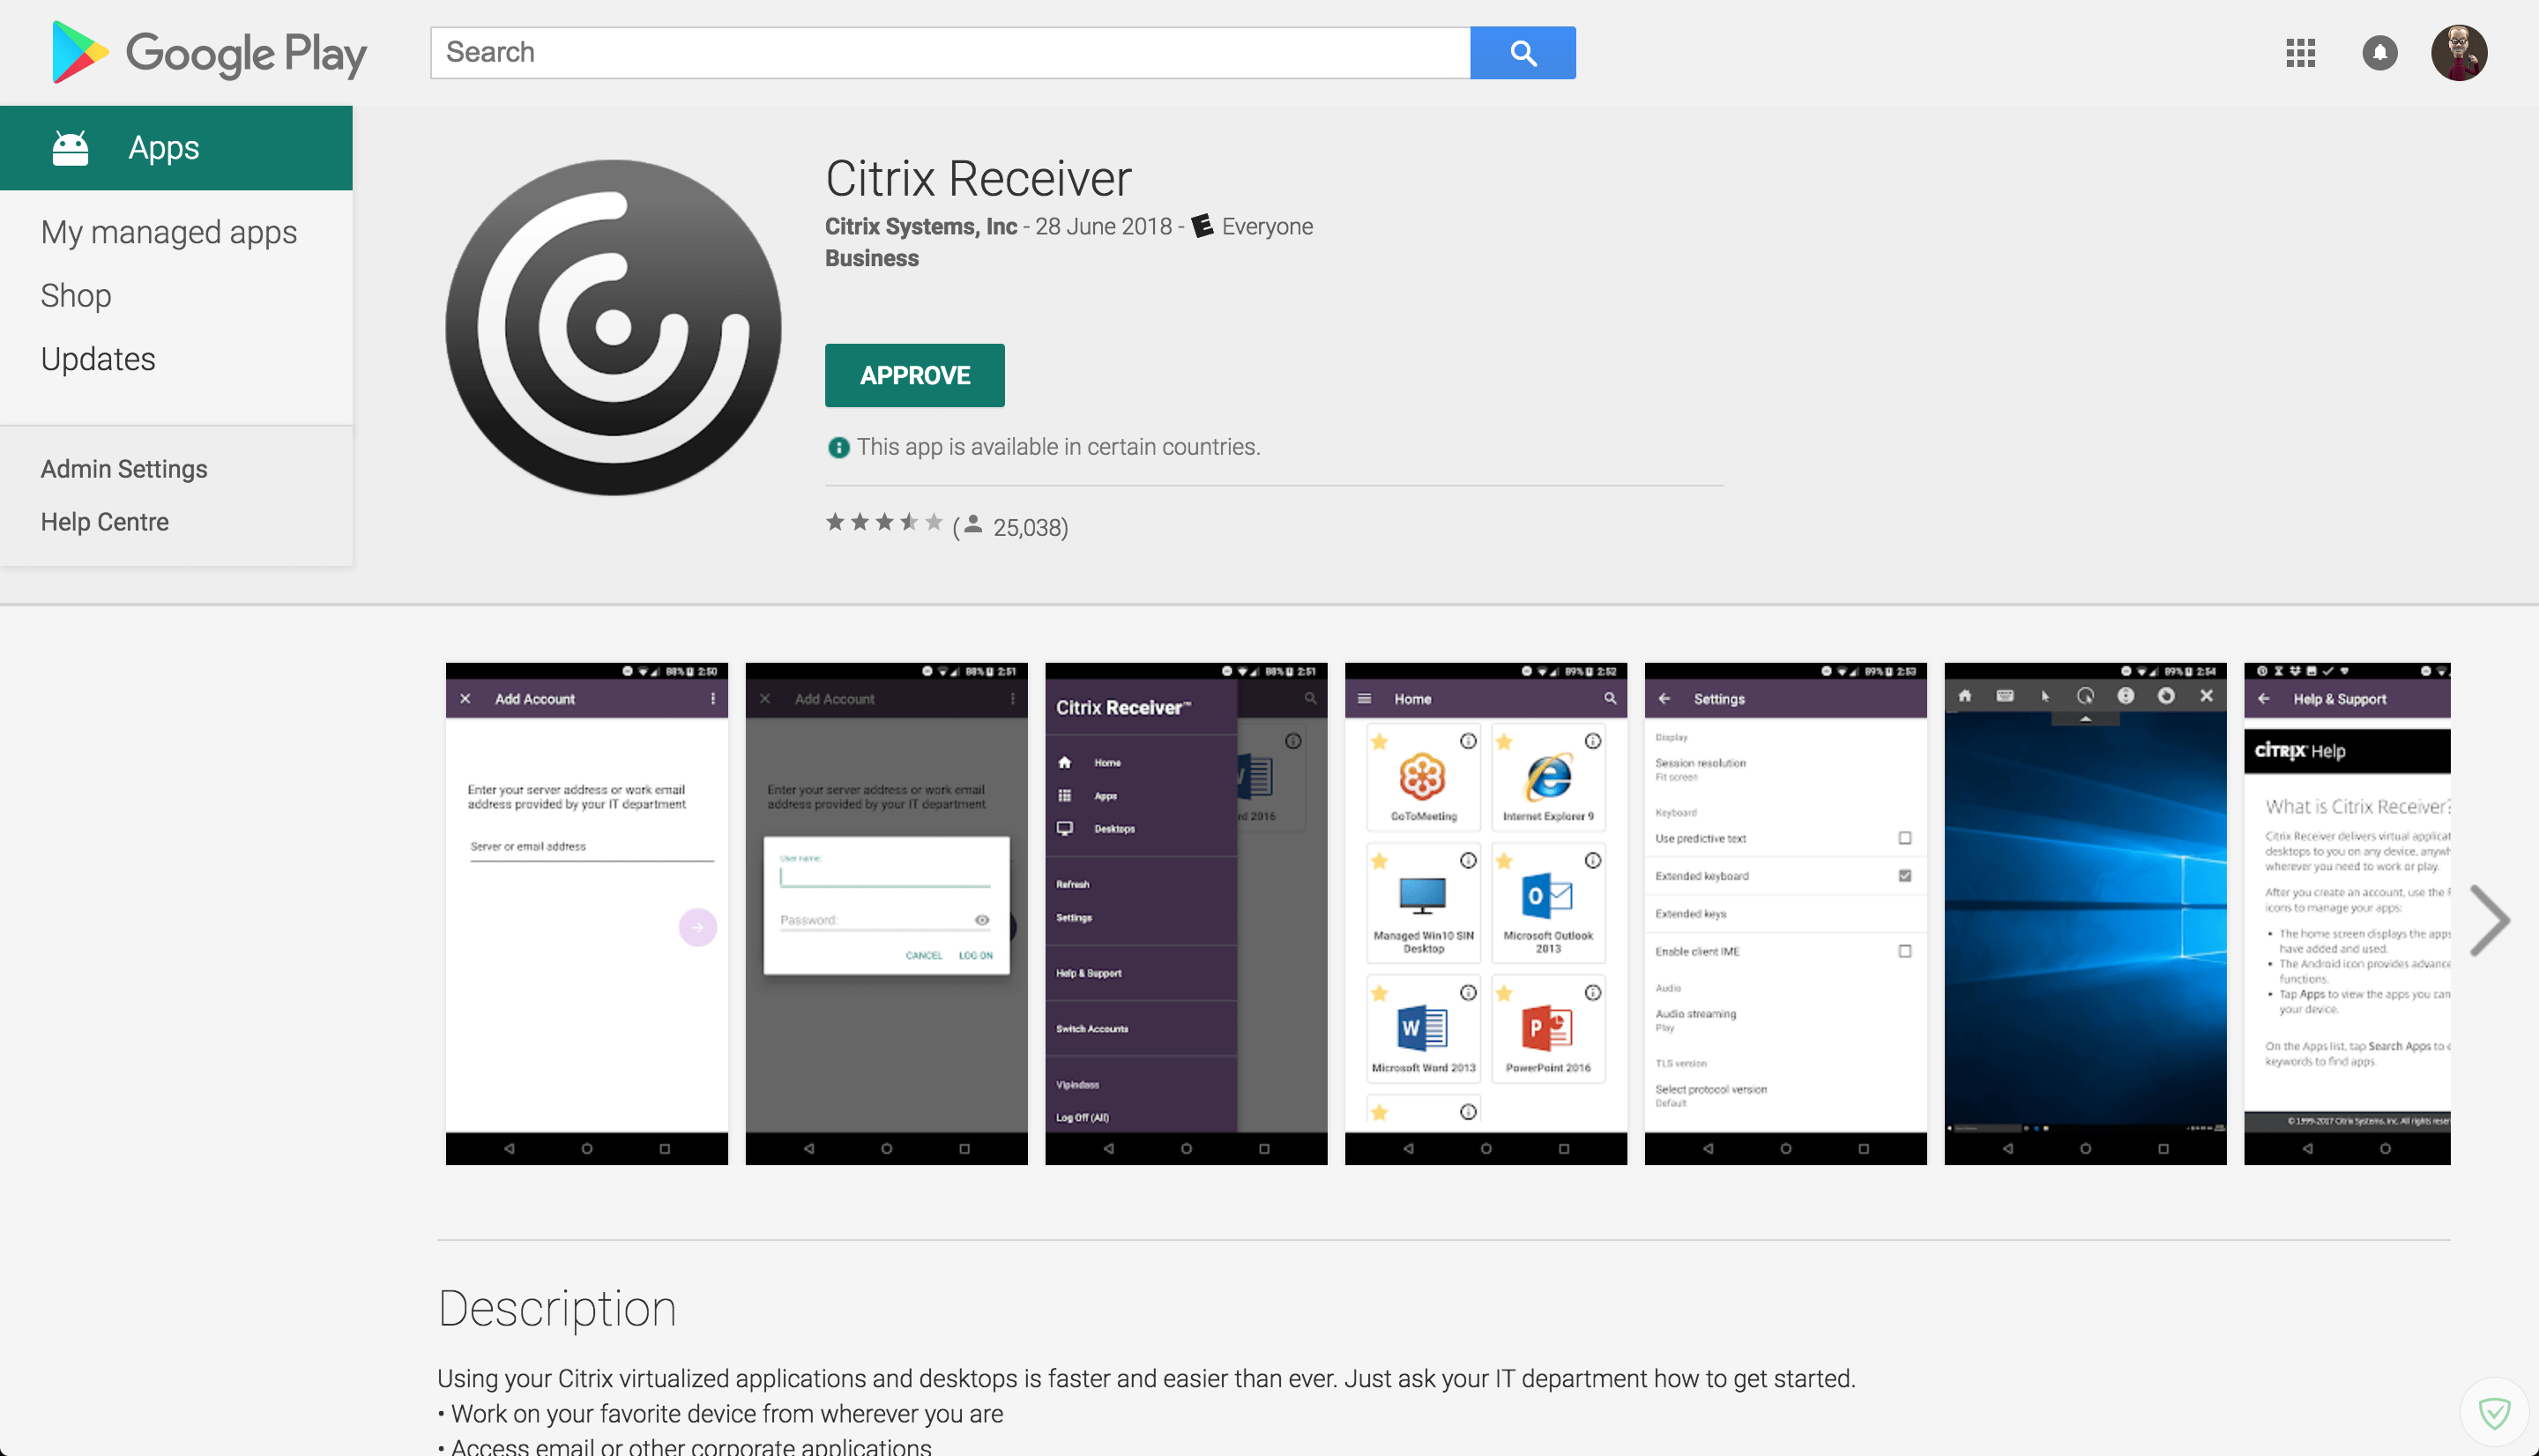 Approving Citrix Receiver in the Google Play store